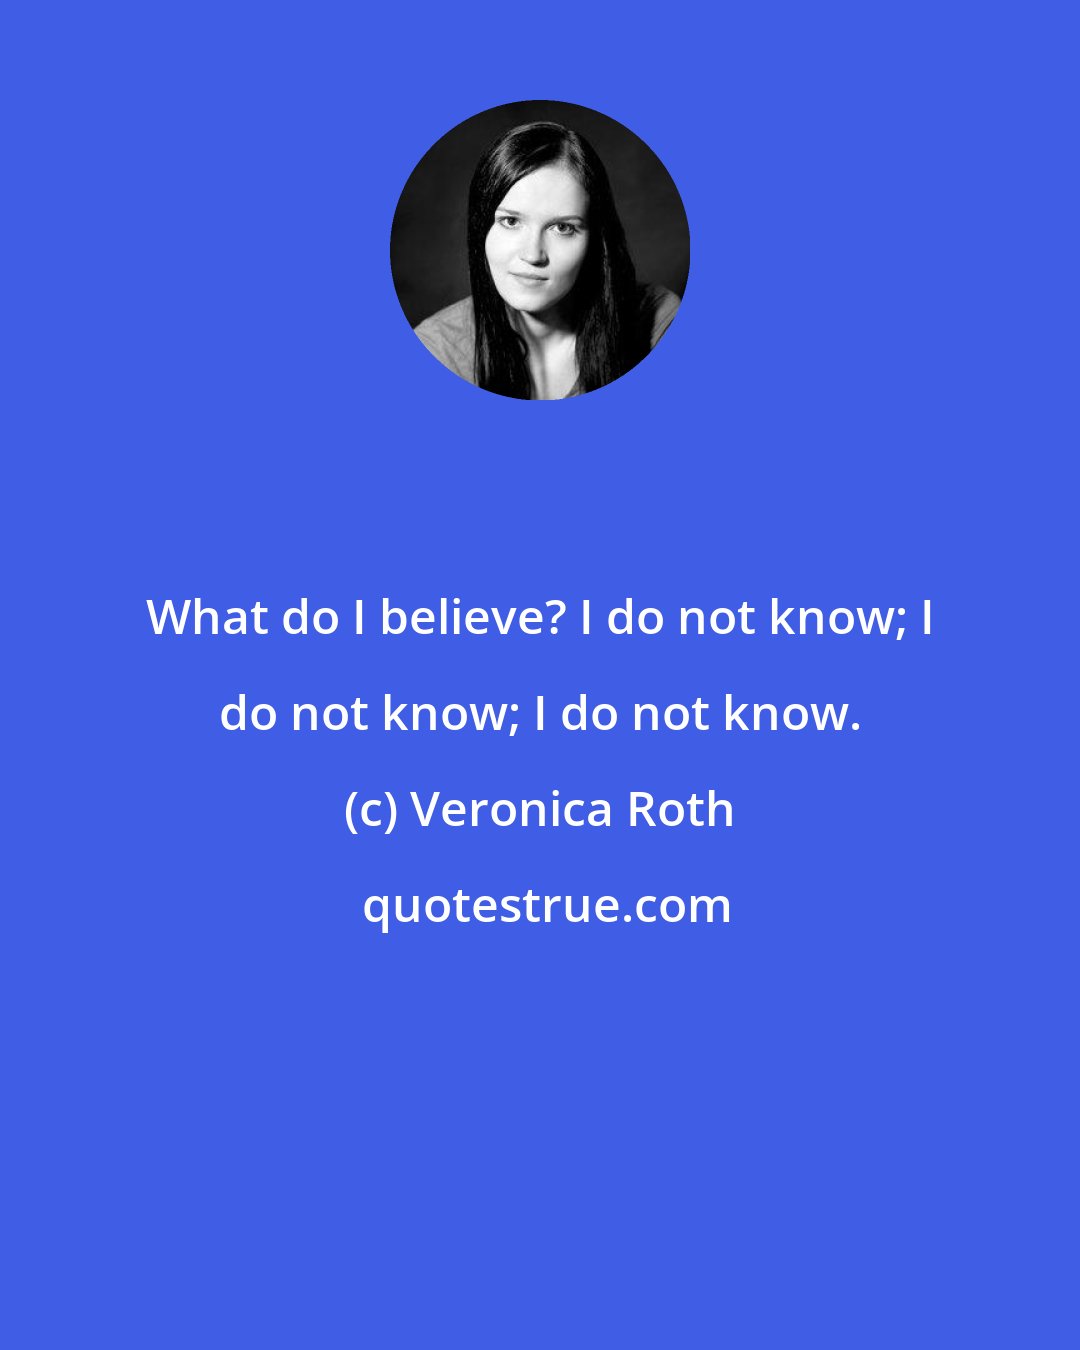 Veronica Roth: What do I believe? I do not know; I do not know; I do not know.